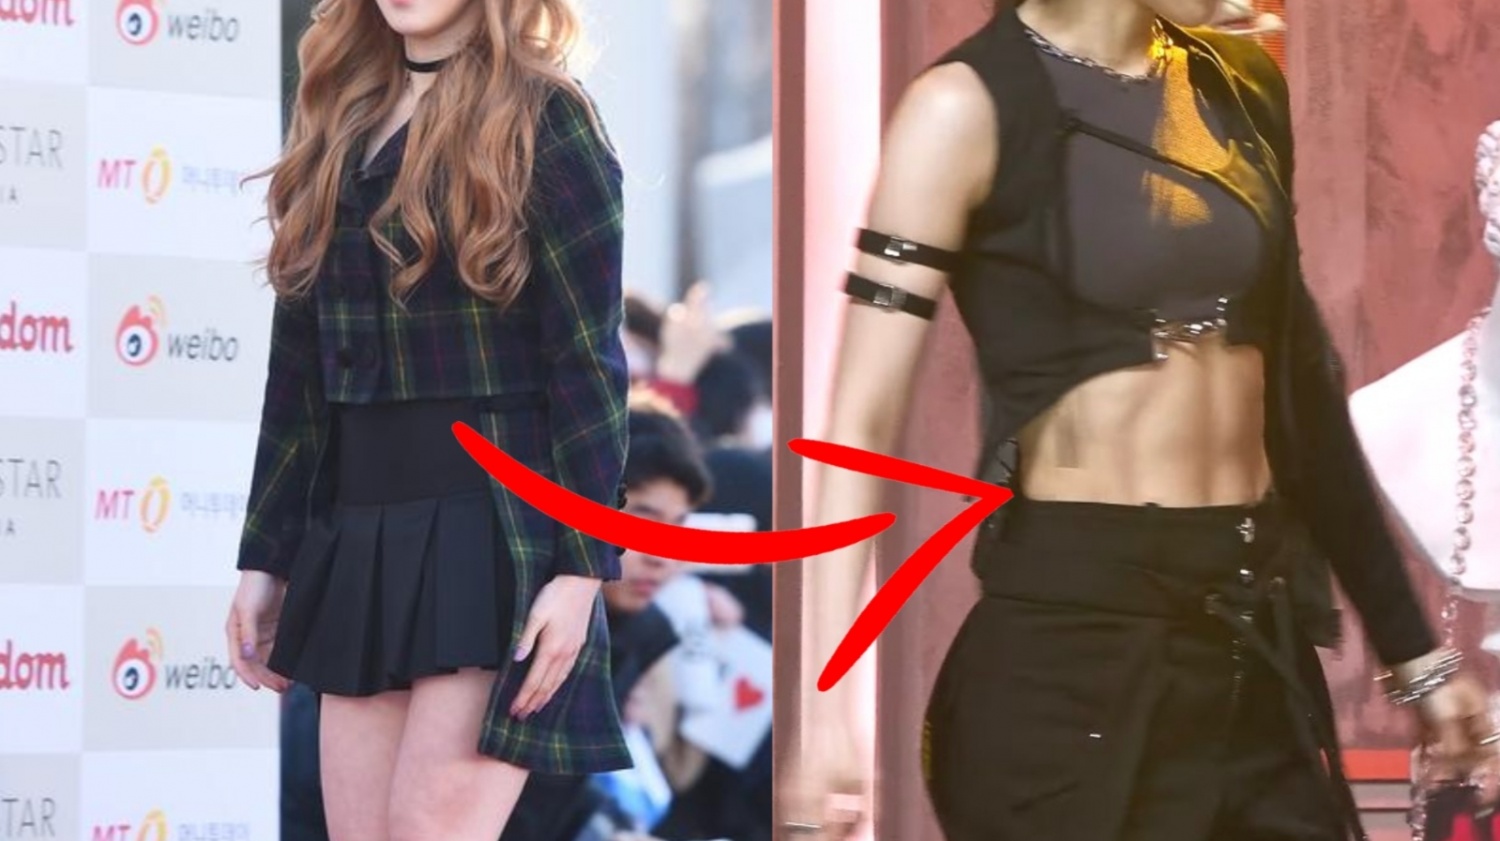 This idol used to be bullied for looking “fat” and is now praised for her abs